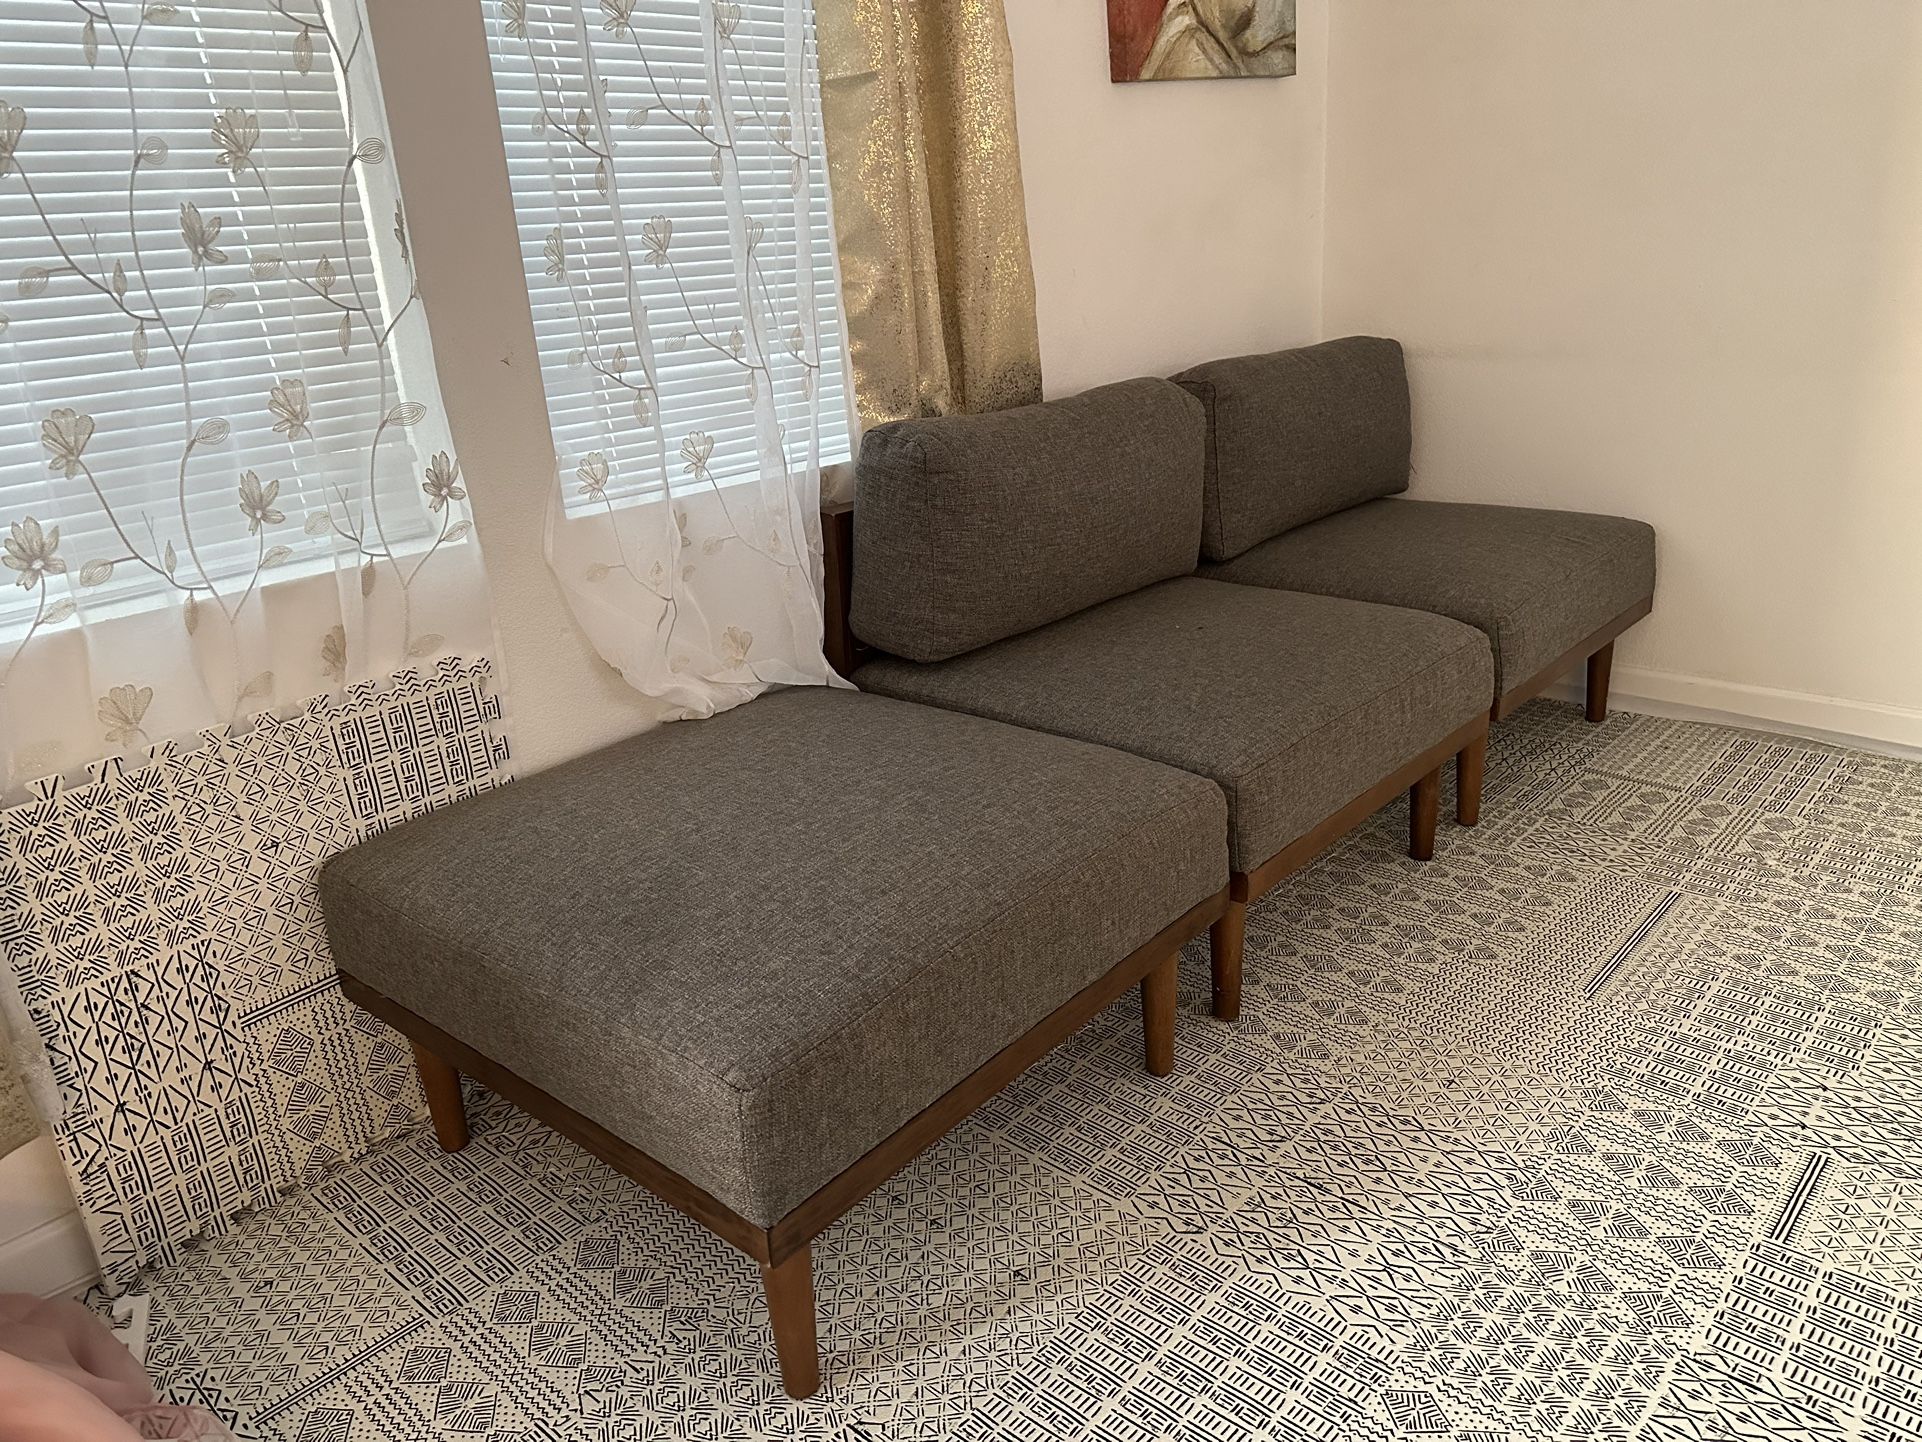 Grey Couch Set 